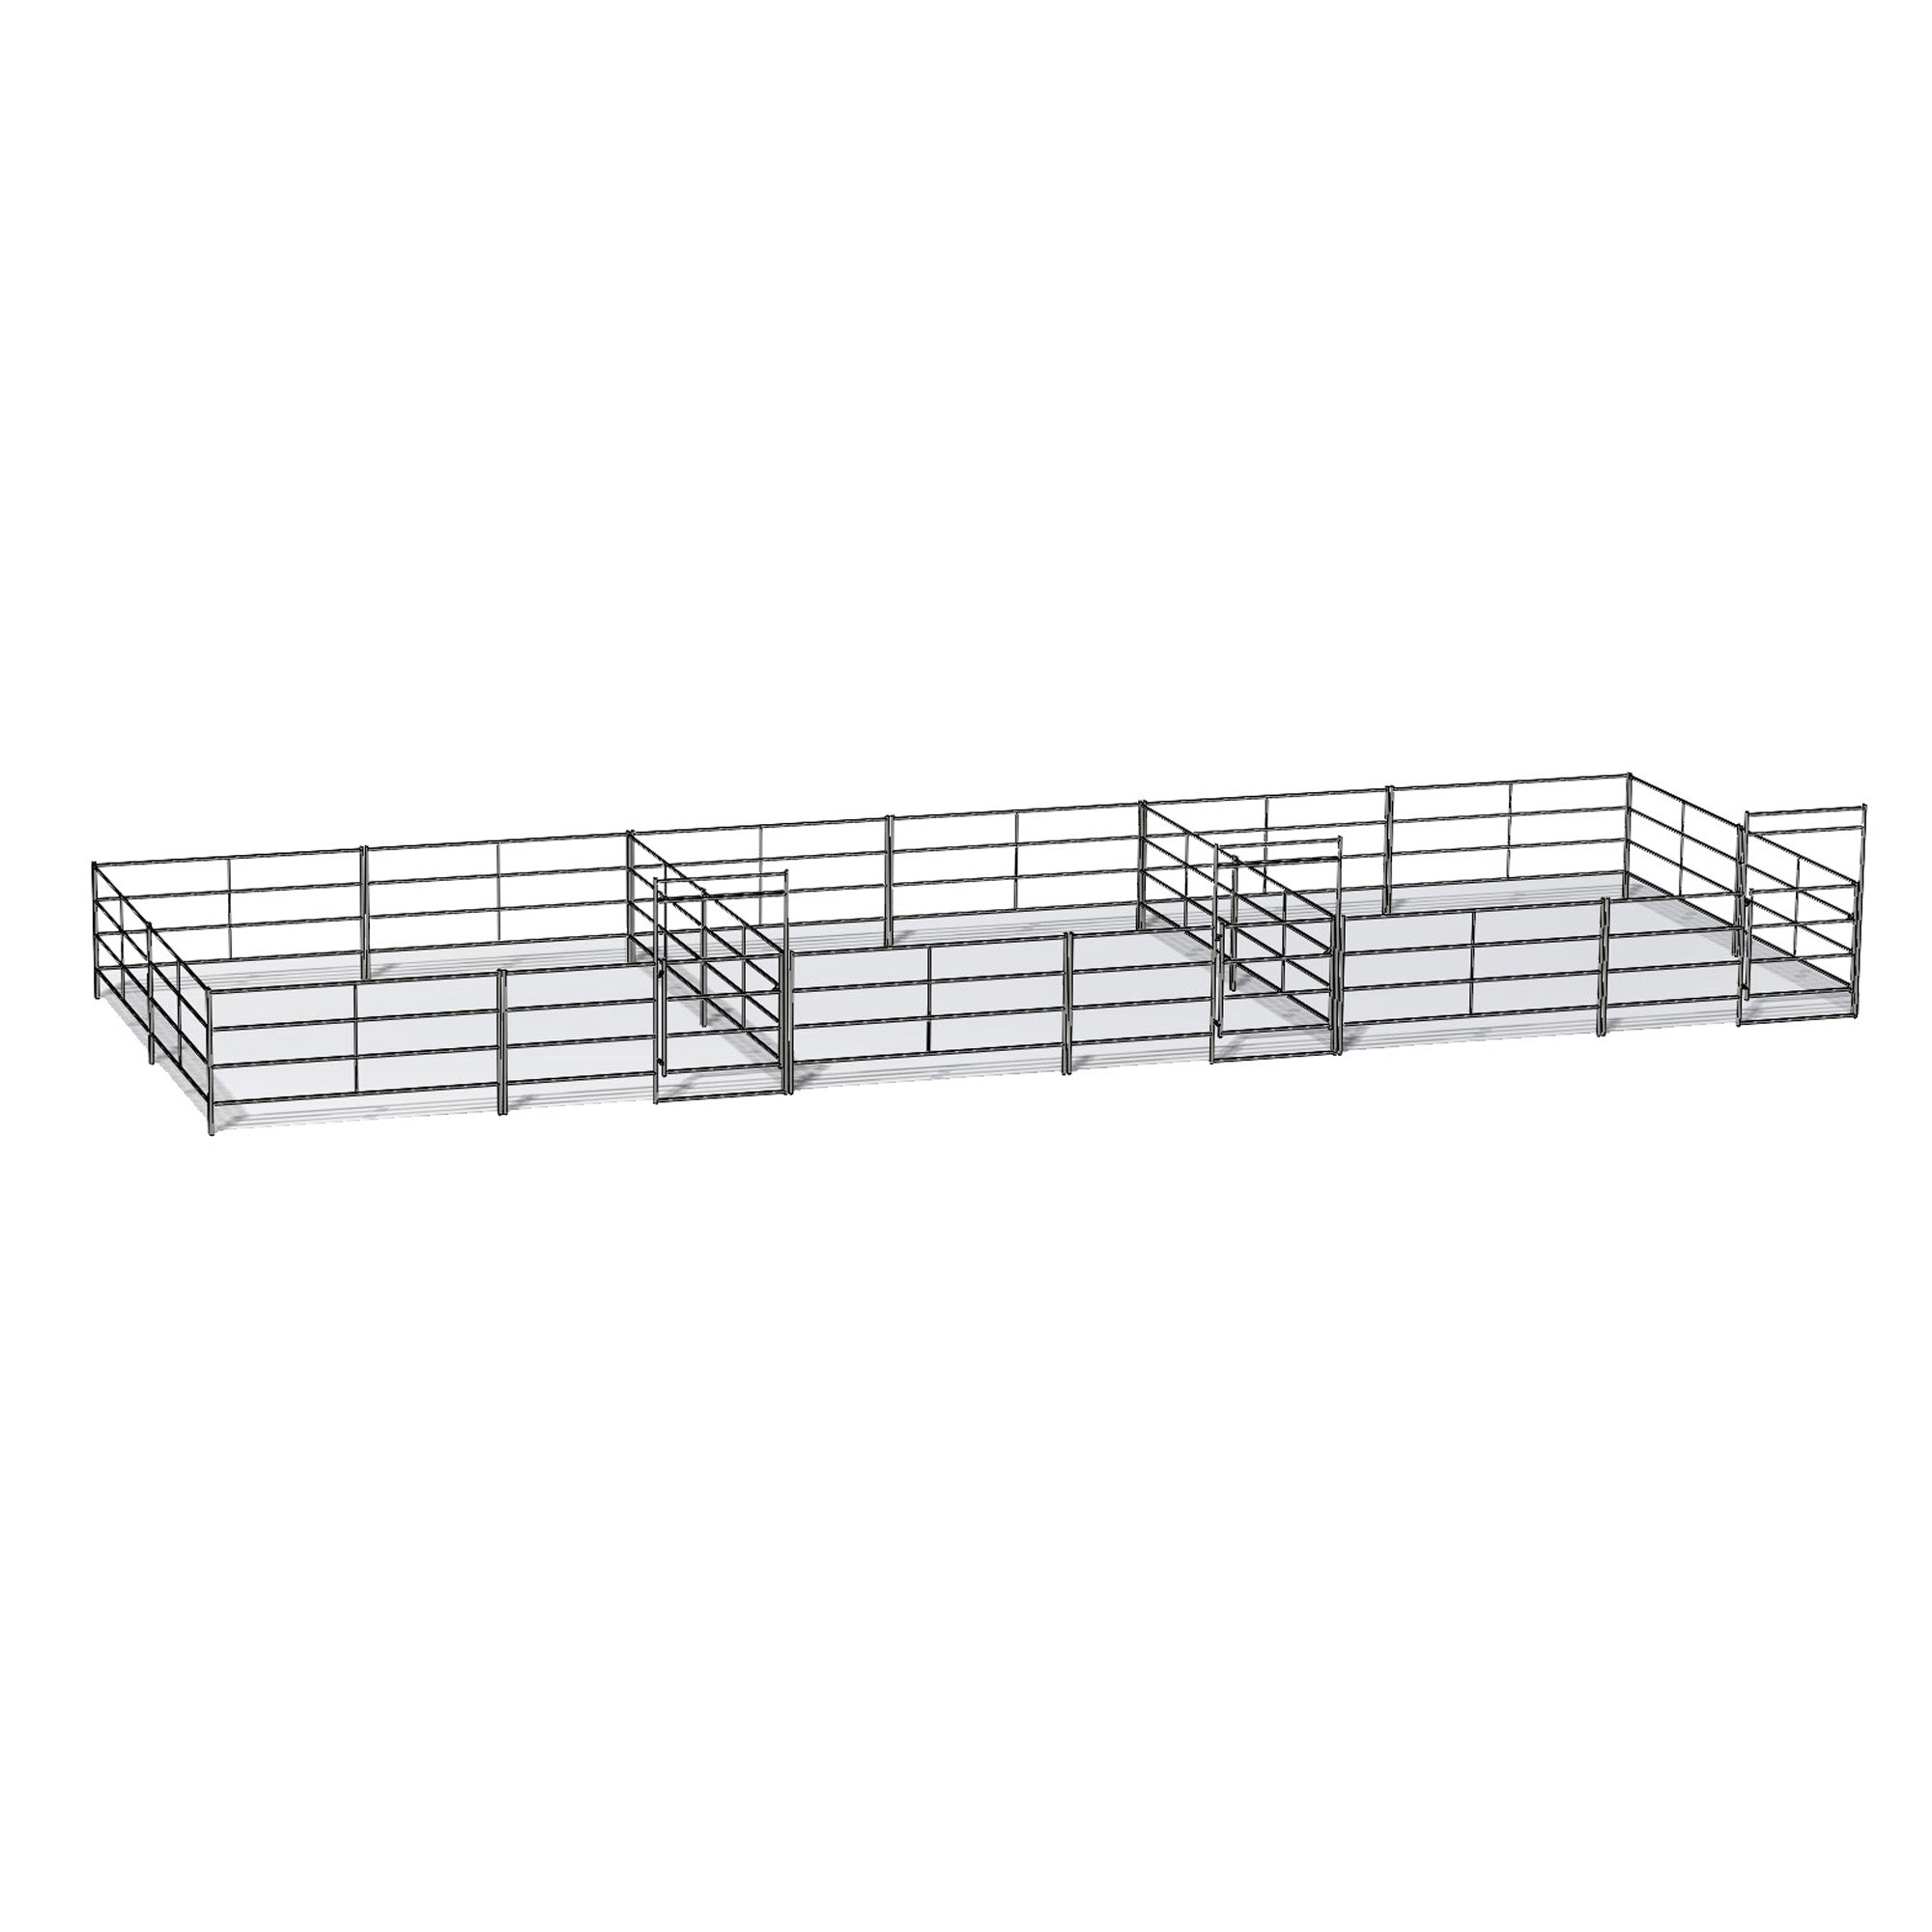 Three 24 Ft X 24 Ft Side by Side Stall Kit (4 Rail)